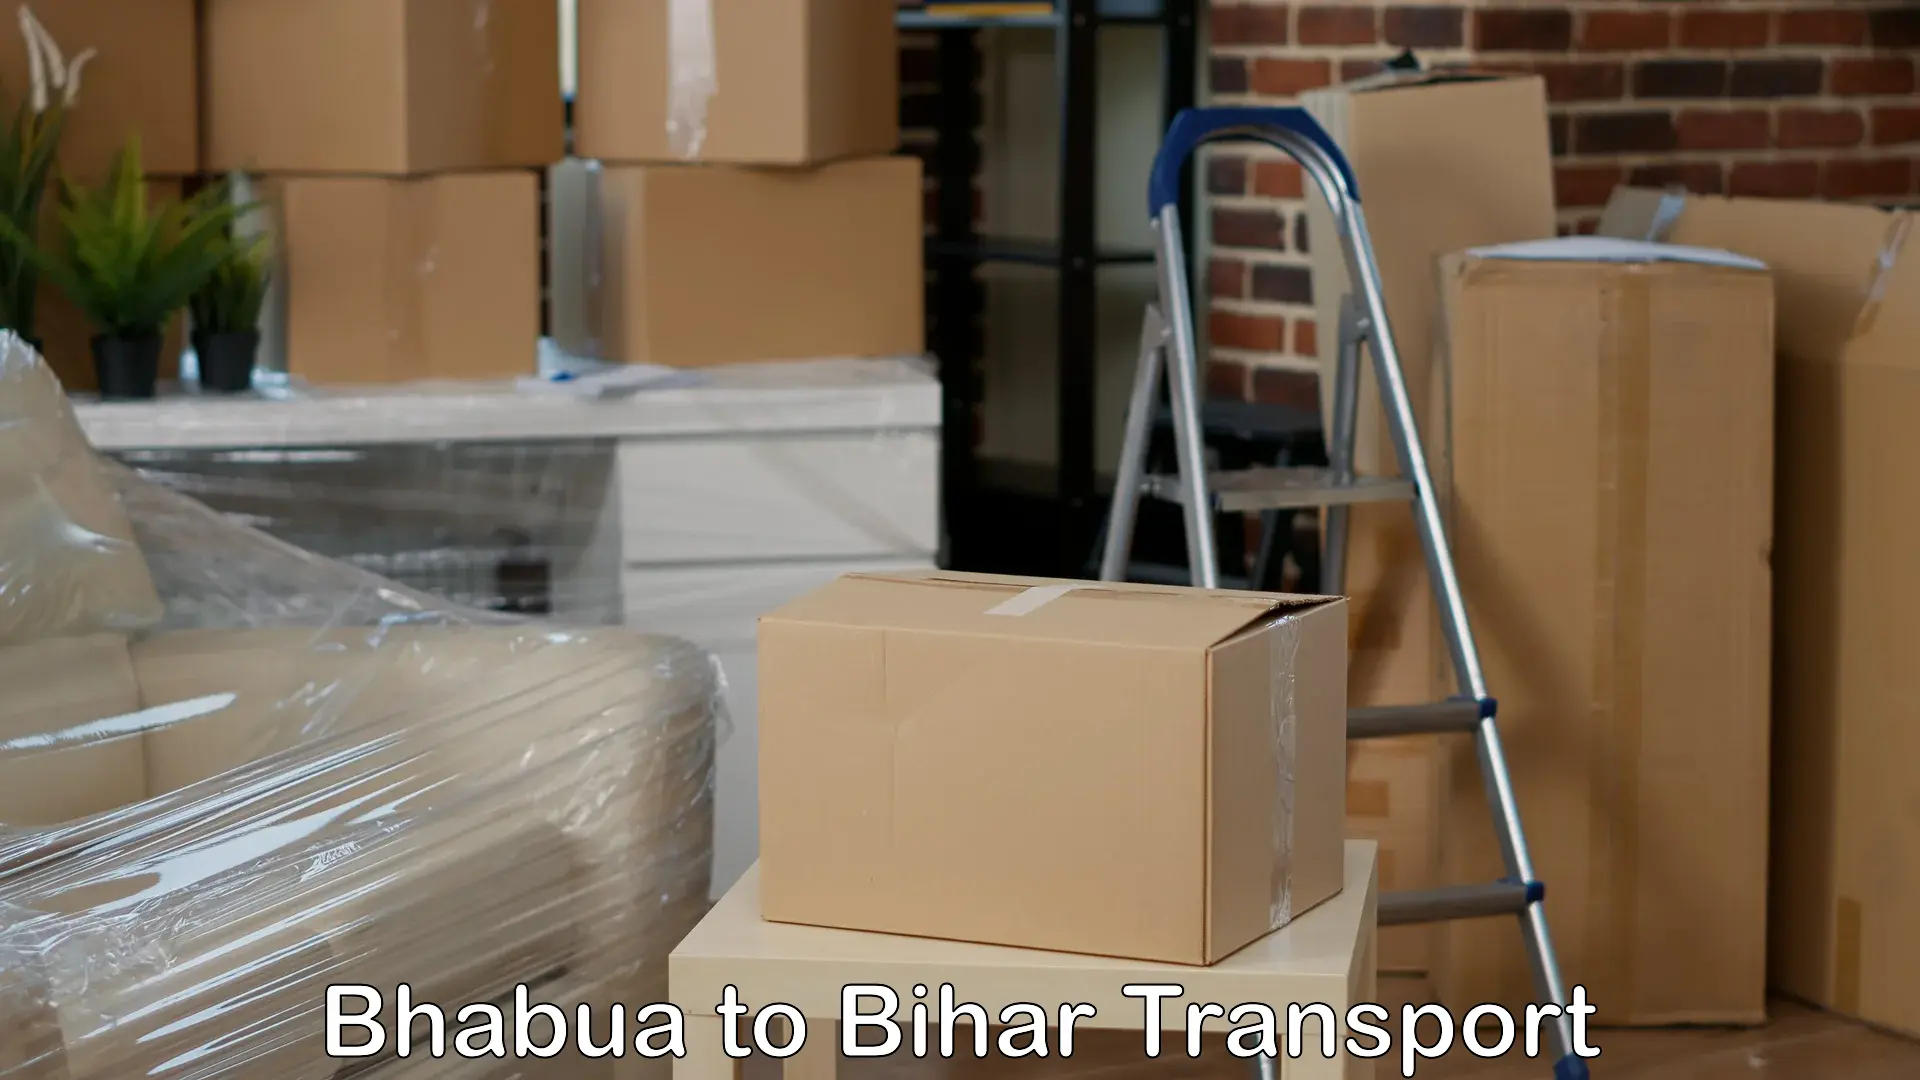 Nearby transport service Bhabua to Munger